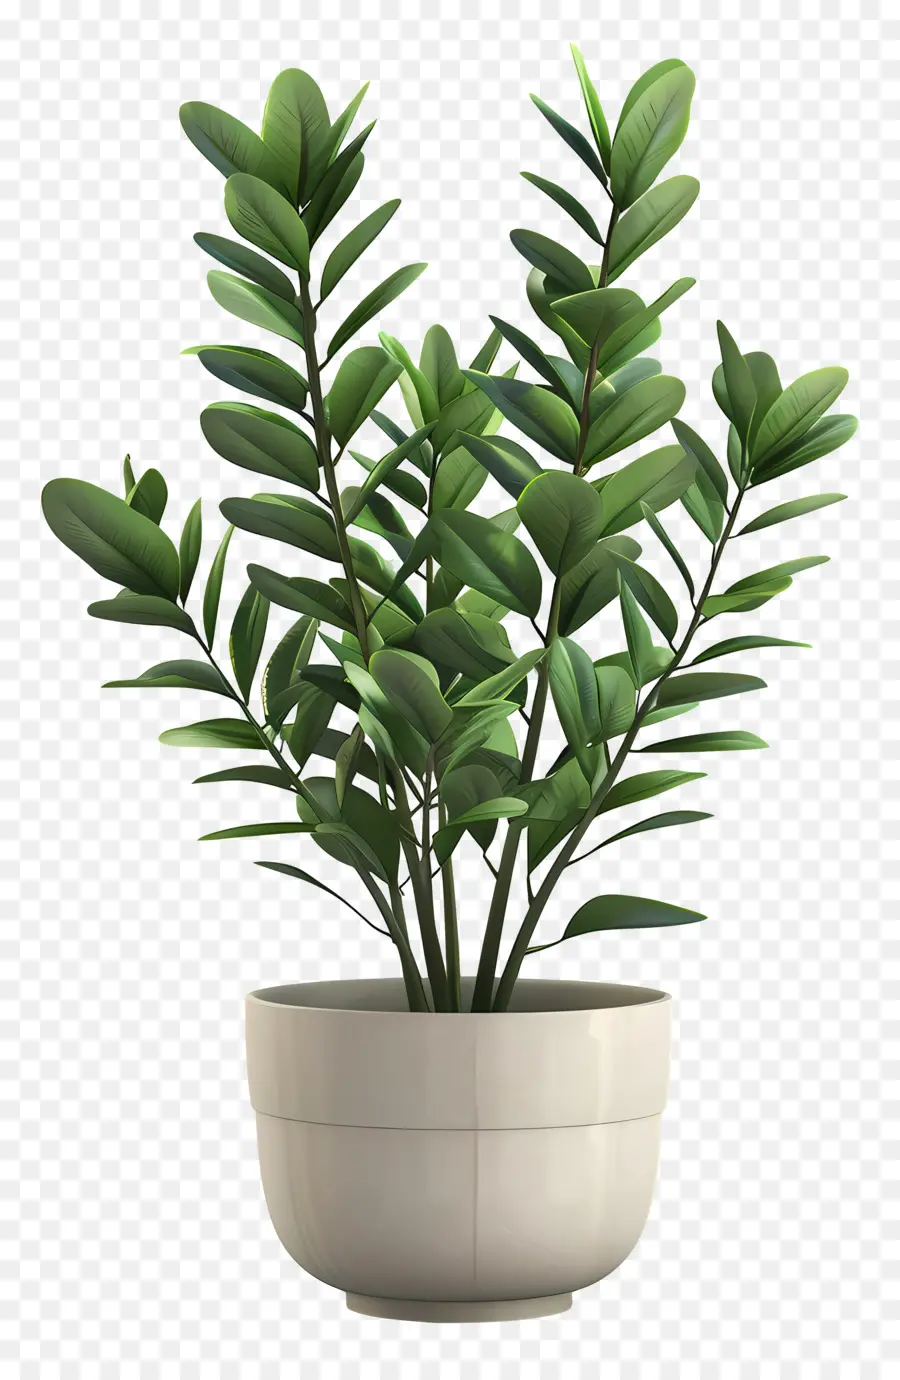 zz plant indoor plant potted plant green leaves watered plant